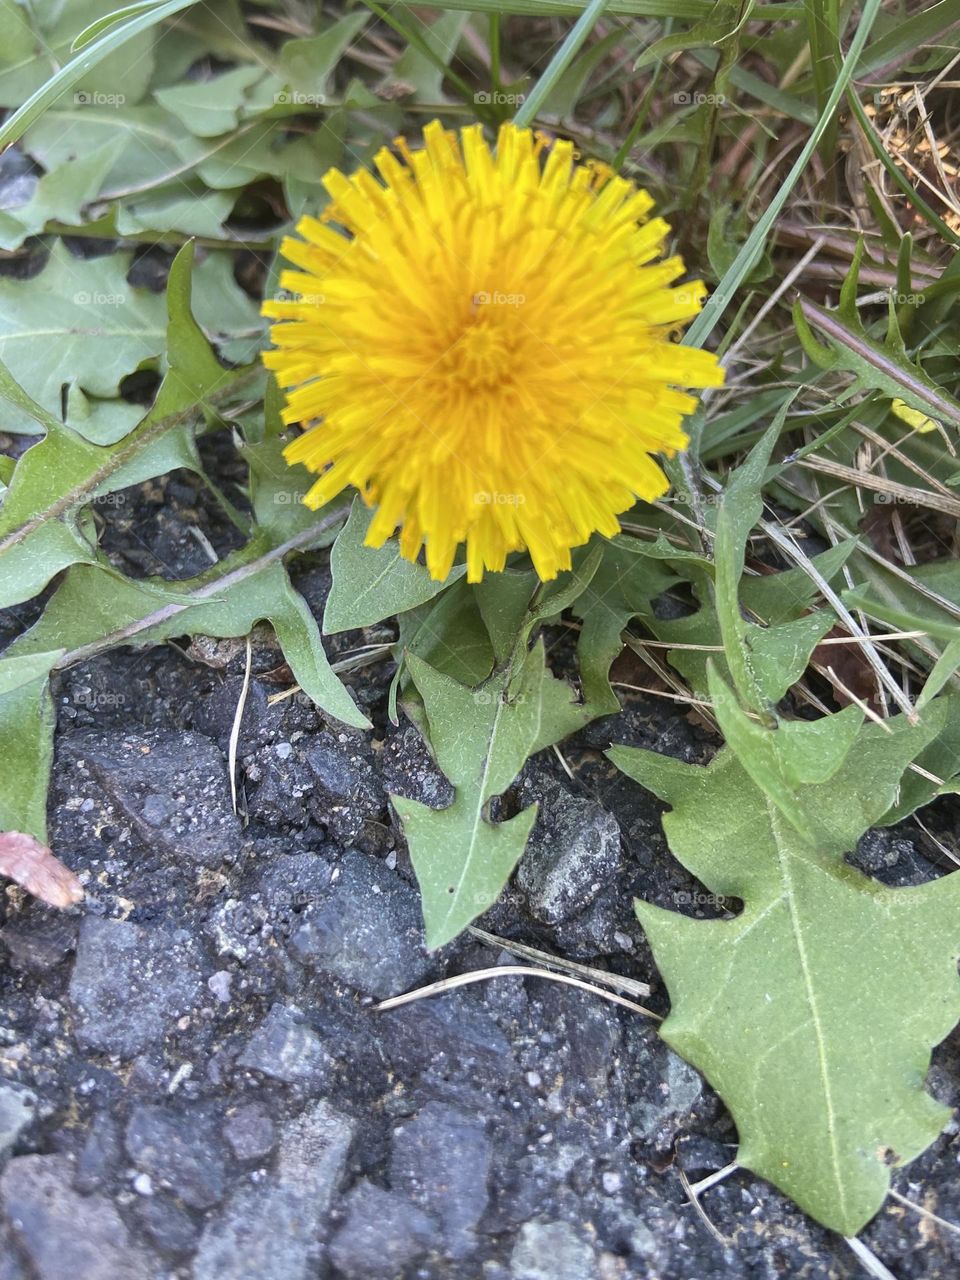 A yellow dandelion I saw on a lunchtime walk around the path in the industrial park where I work. Some people think they are weeds, but I think they are a beautiful pop of color. 